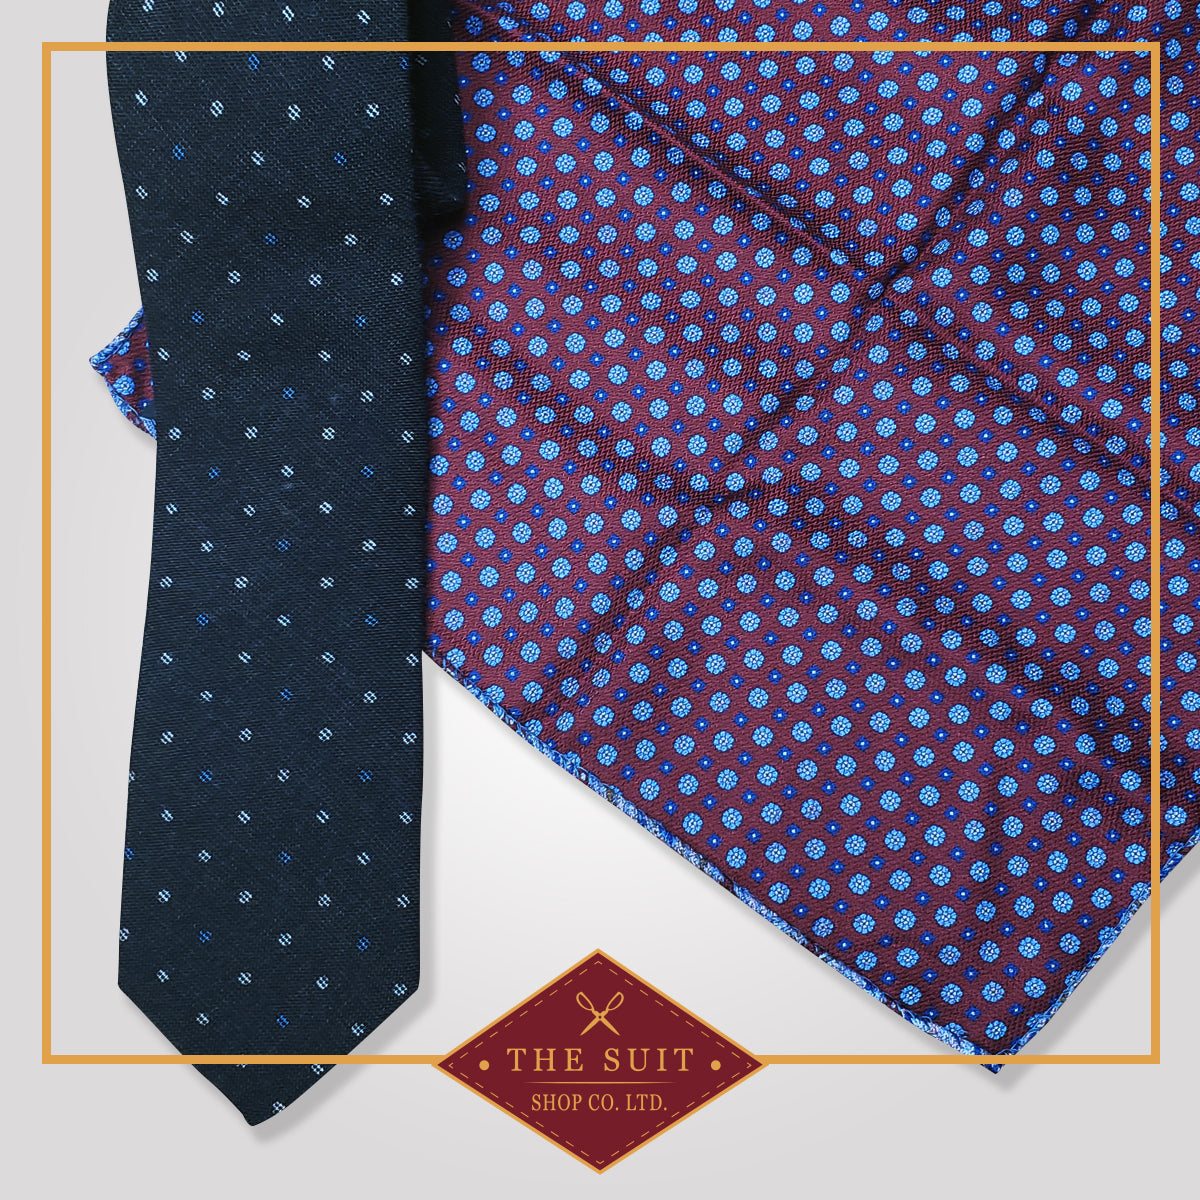 Black Pearl Tie and Wine Berry Patterned Pocket Square